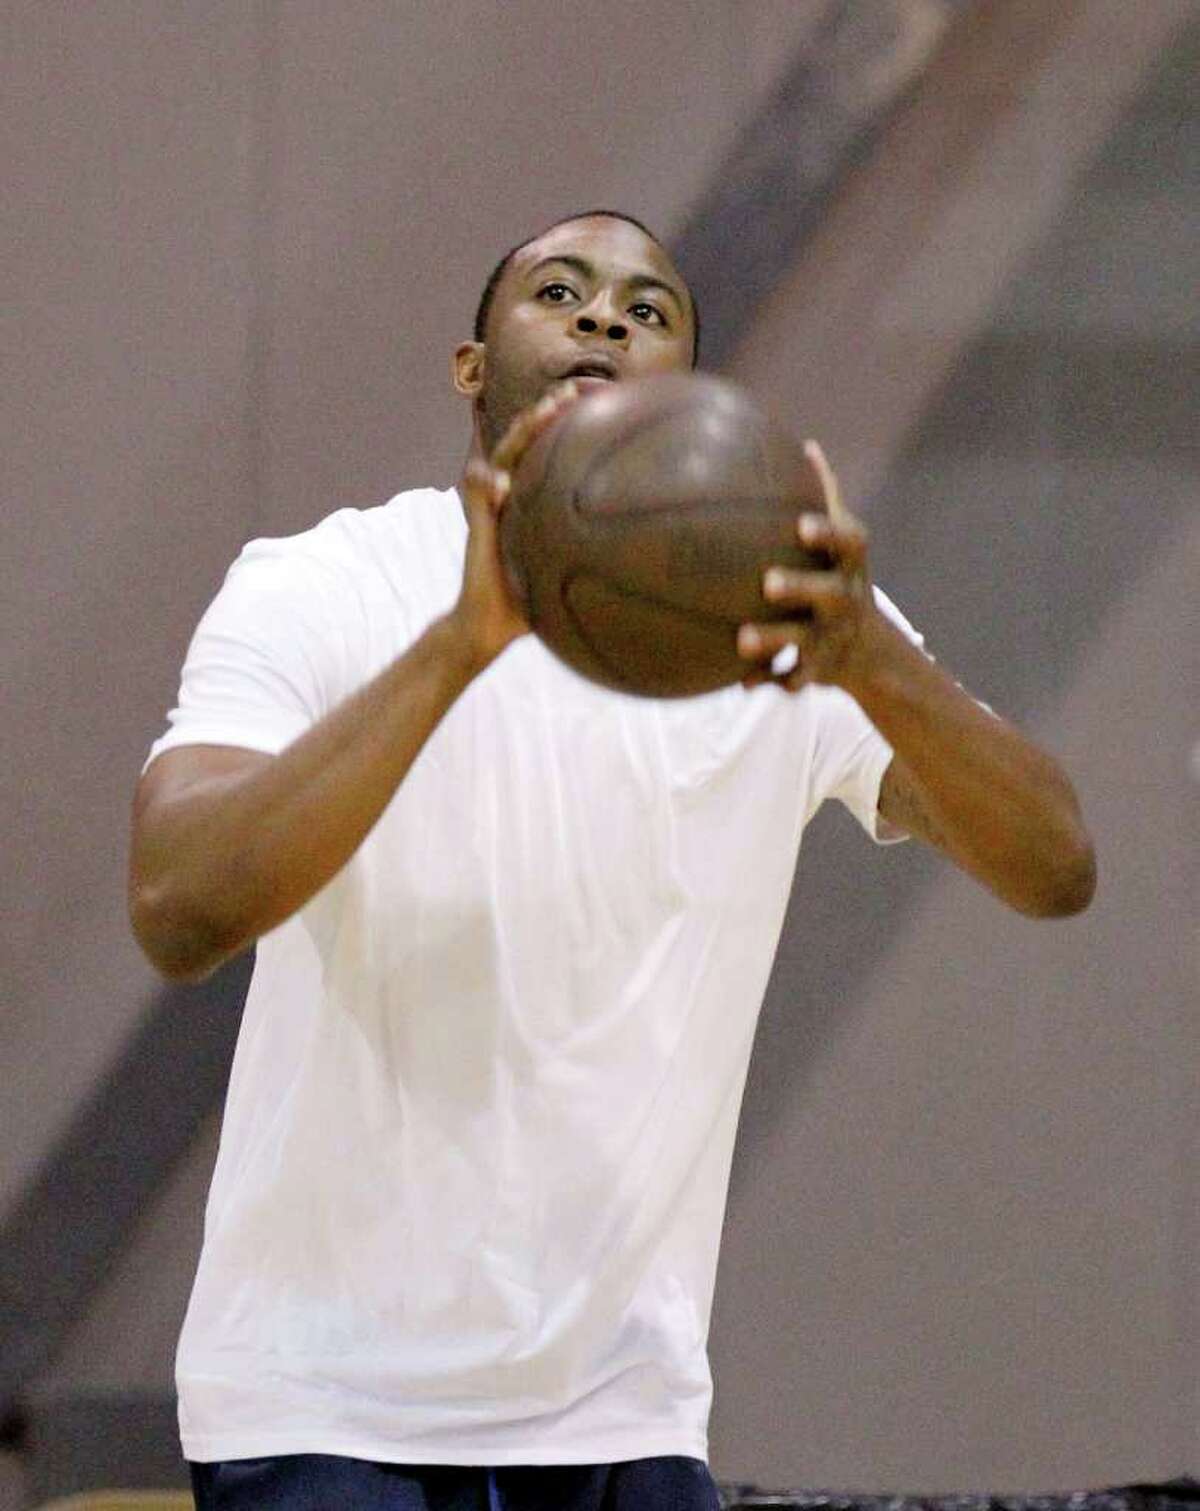 James Anderson warms up prior to an Impact Basketball game on Wednesday, Sept. 14, 2011, in Las Vegas.